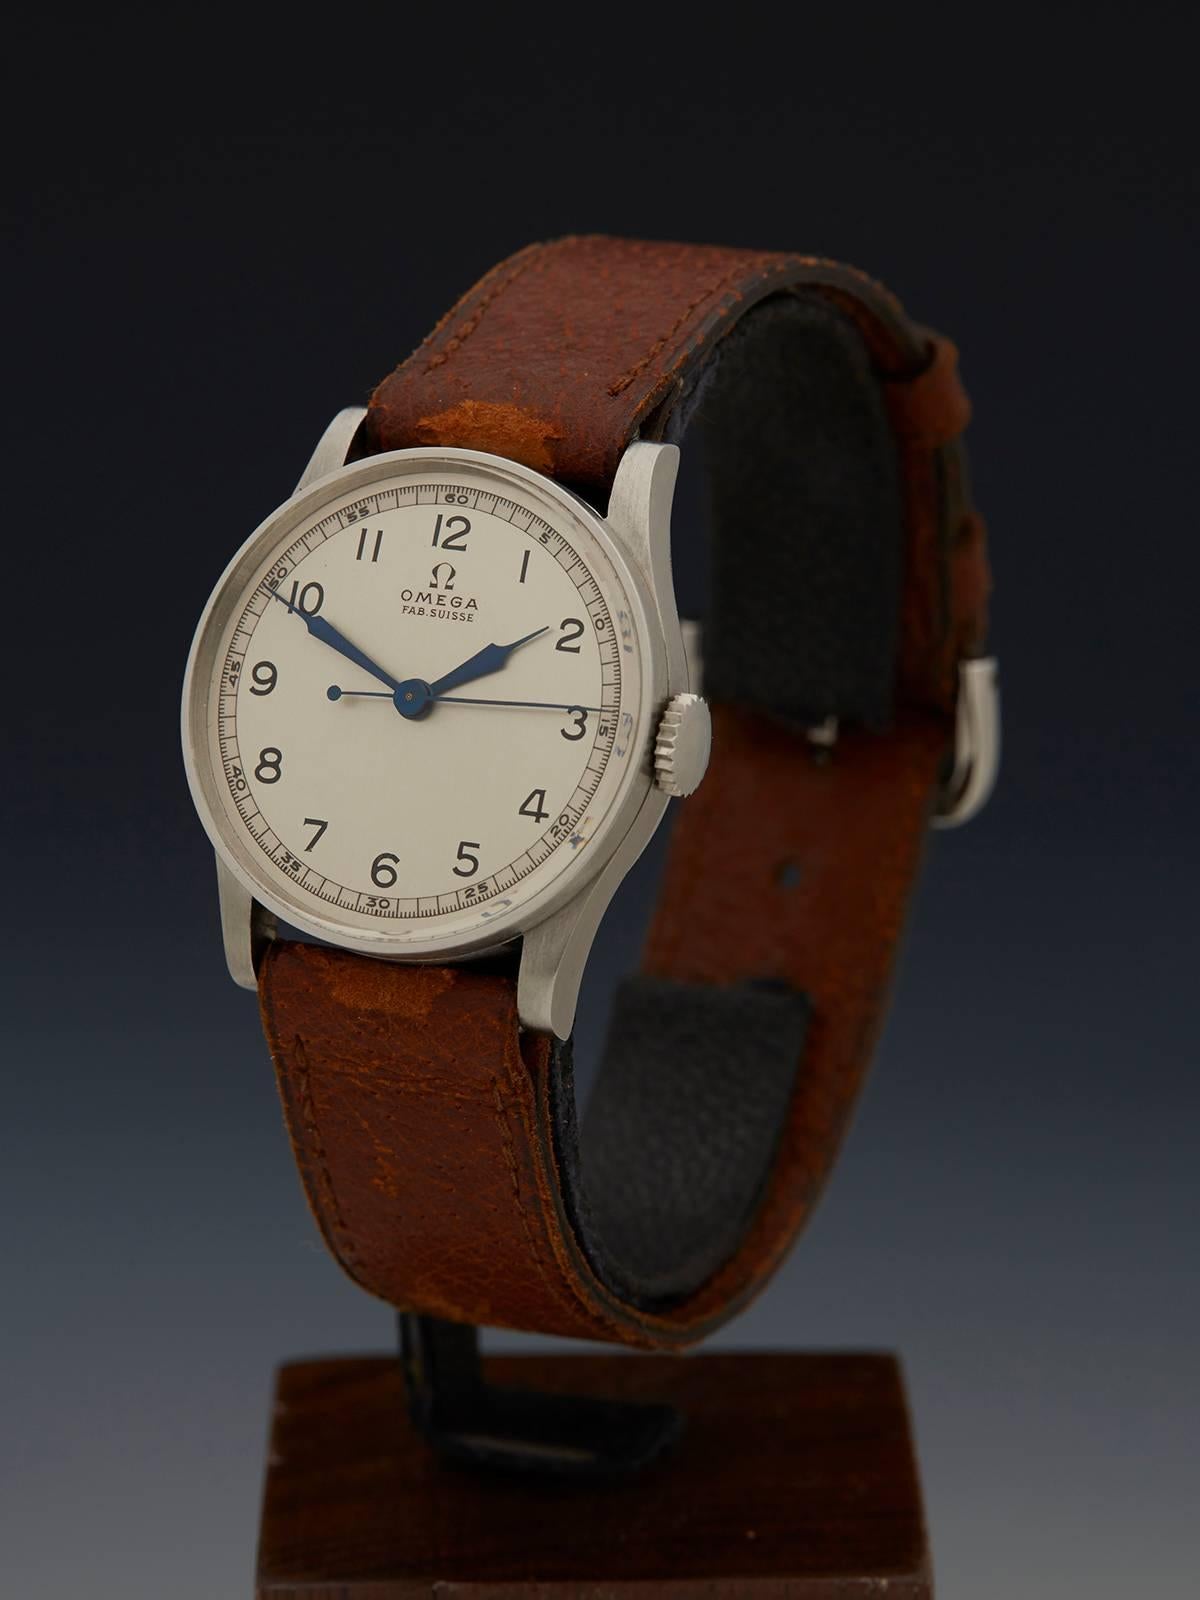 Ref: COM693
Serial Number: 938****
Condition: 9 - Excellent condition
Age: Circa 1934
Case Diameter: 29 mm
Case Size: 28.5mm
Box and Papers: Box only
Movement: Mechanical Wind
Case: Stainless Steel
Dial: Silver
Bracelet: Brown Leather
Strap Length: